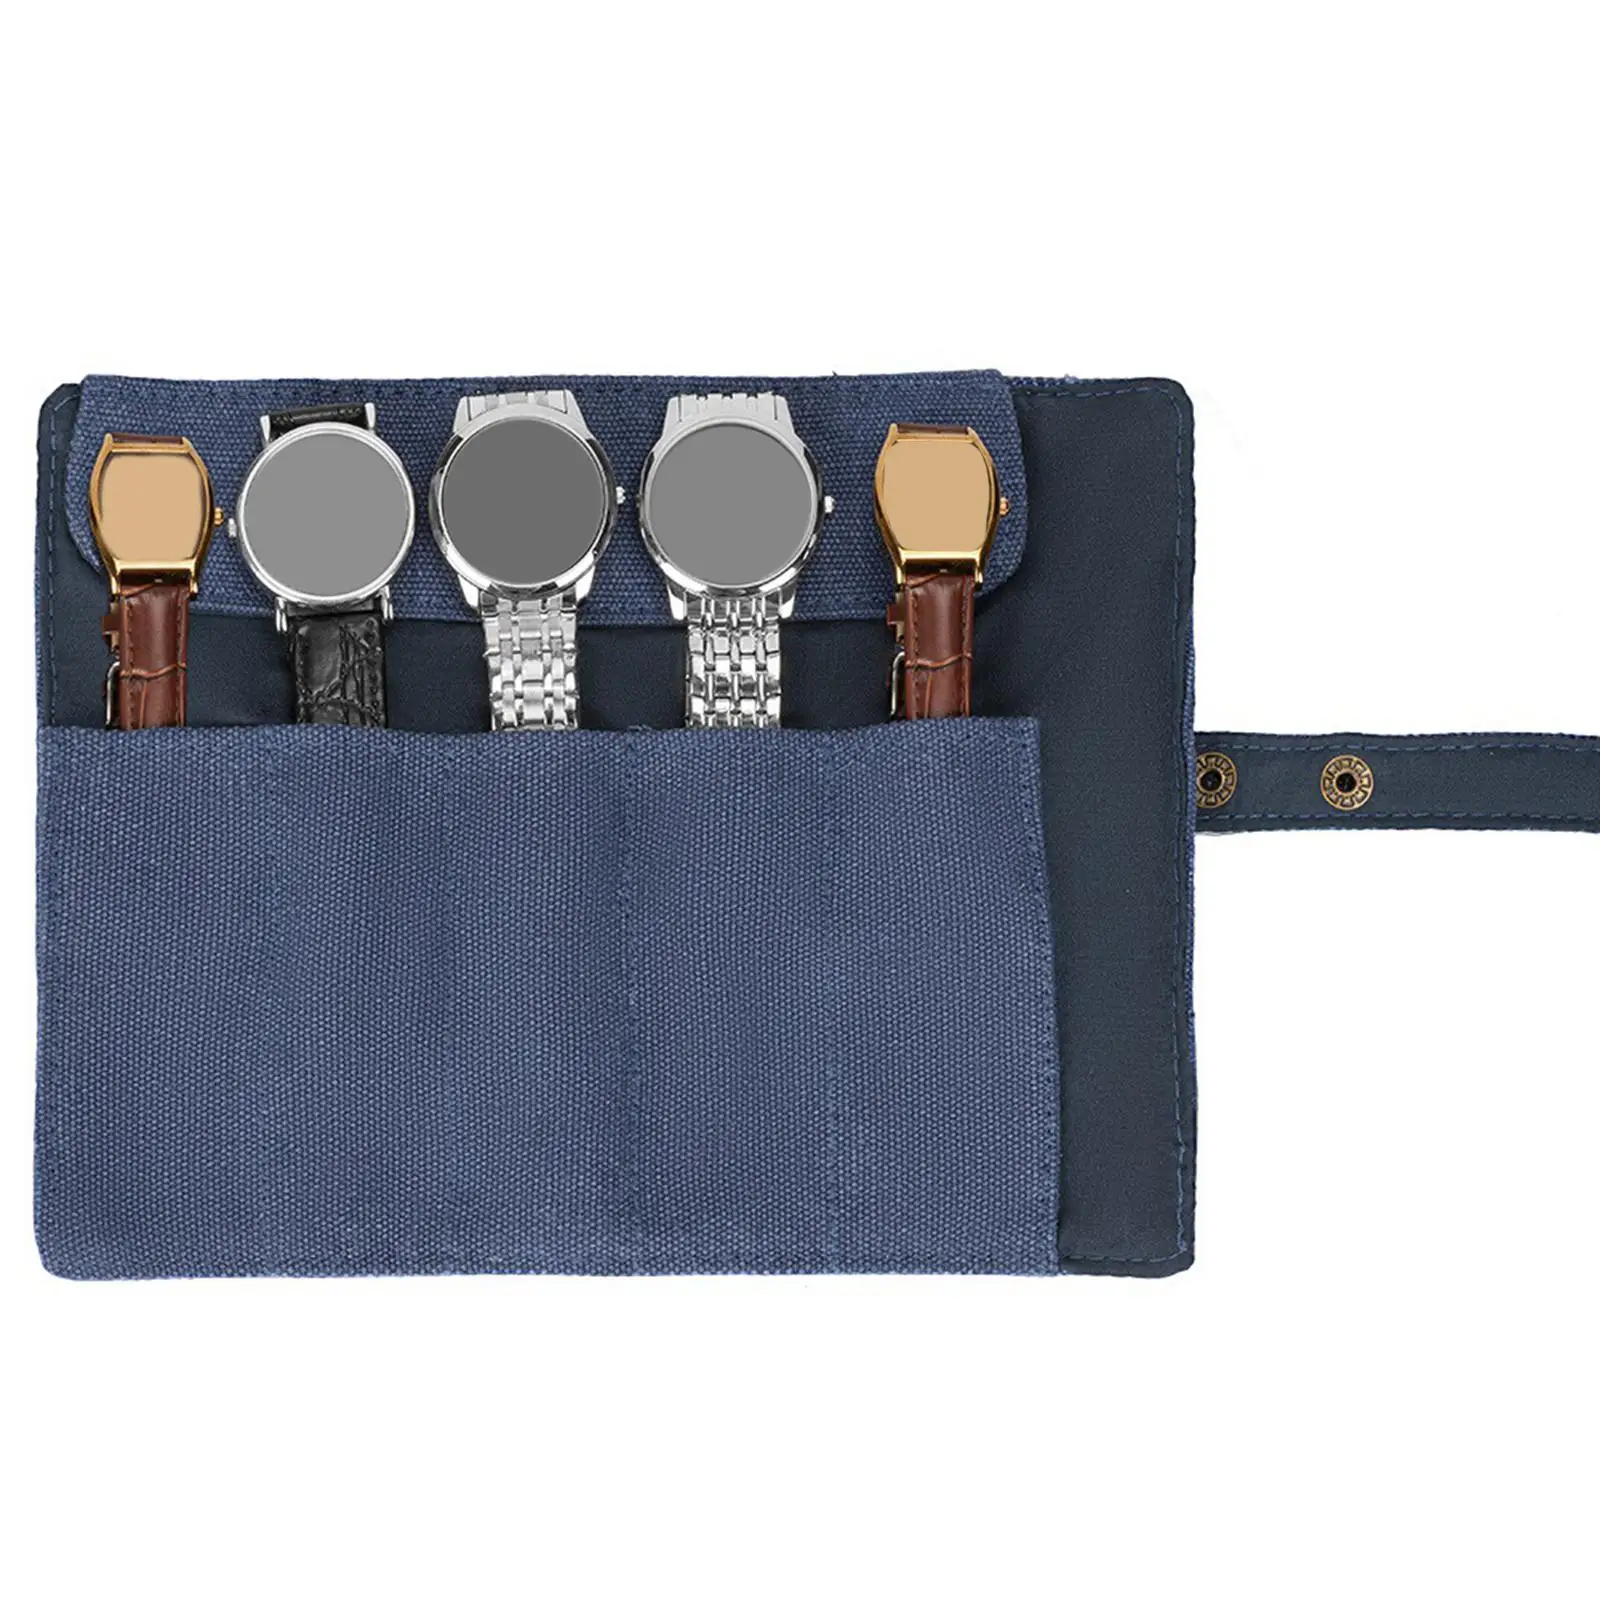 Watch Roll Travel Case 5 Slots Smartwatch Wristwatch Pouch Display Jewelry Case with Bag Strap Canvas Storage Bag for Men Women